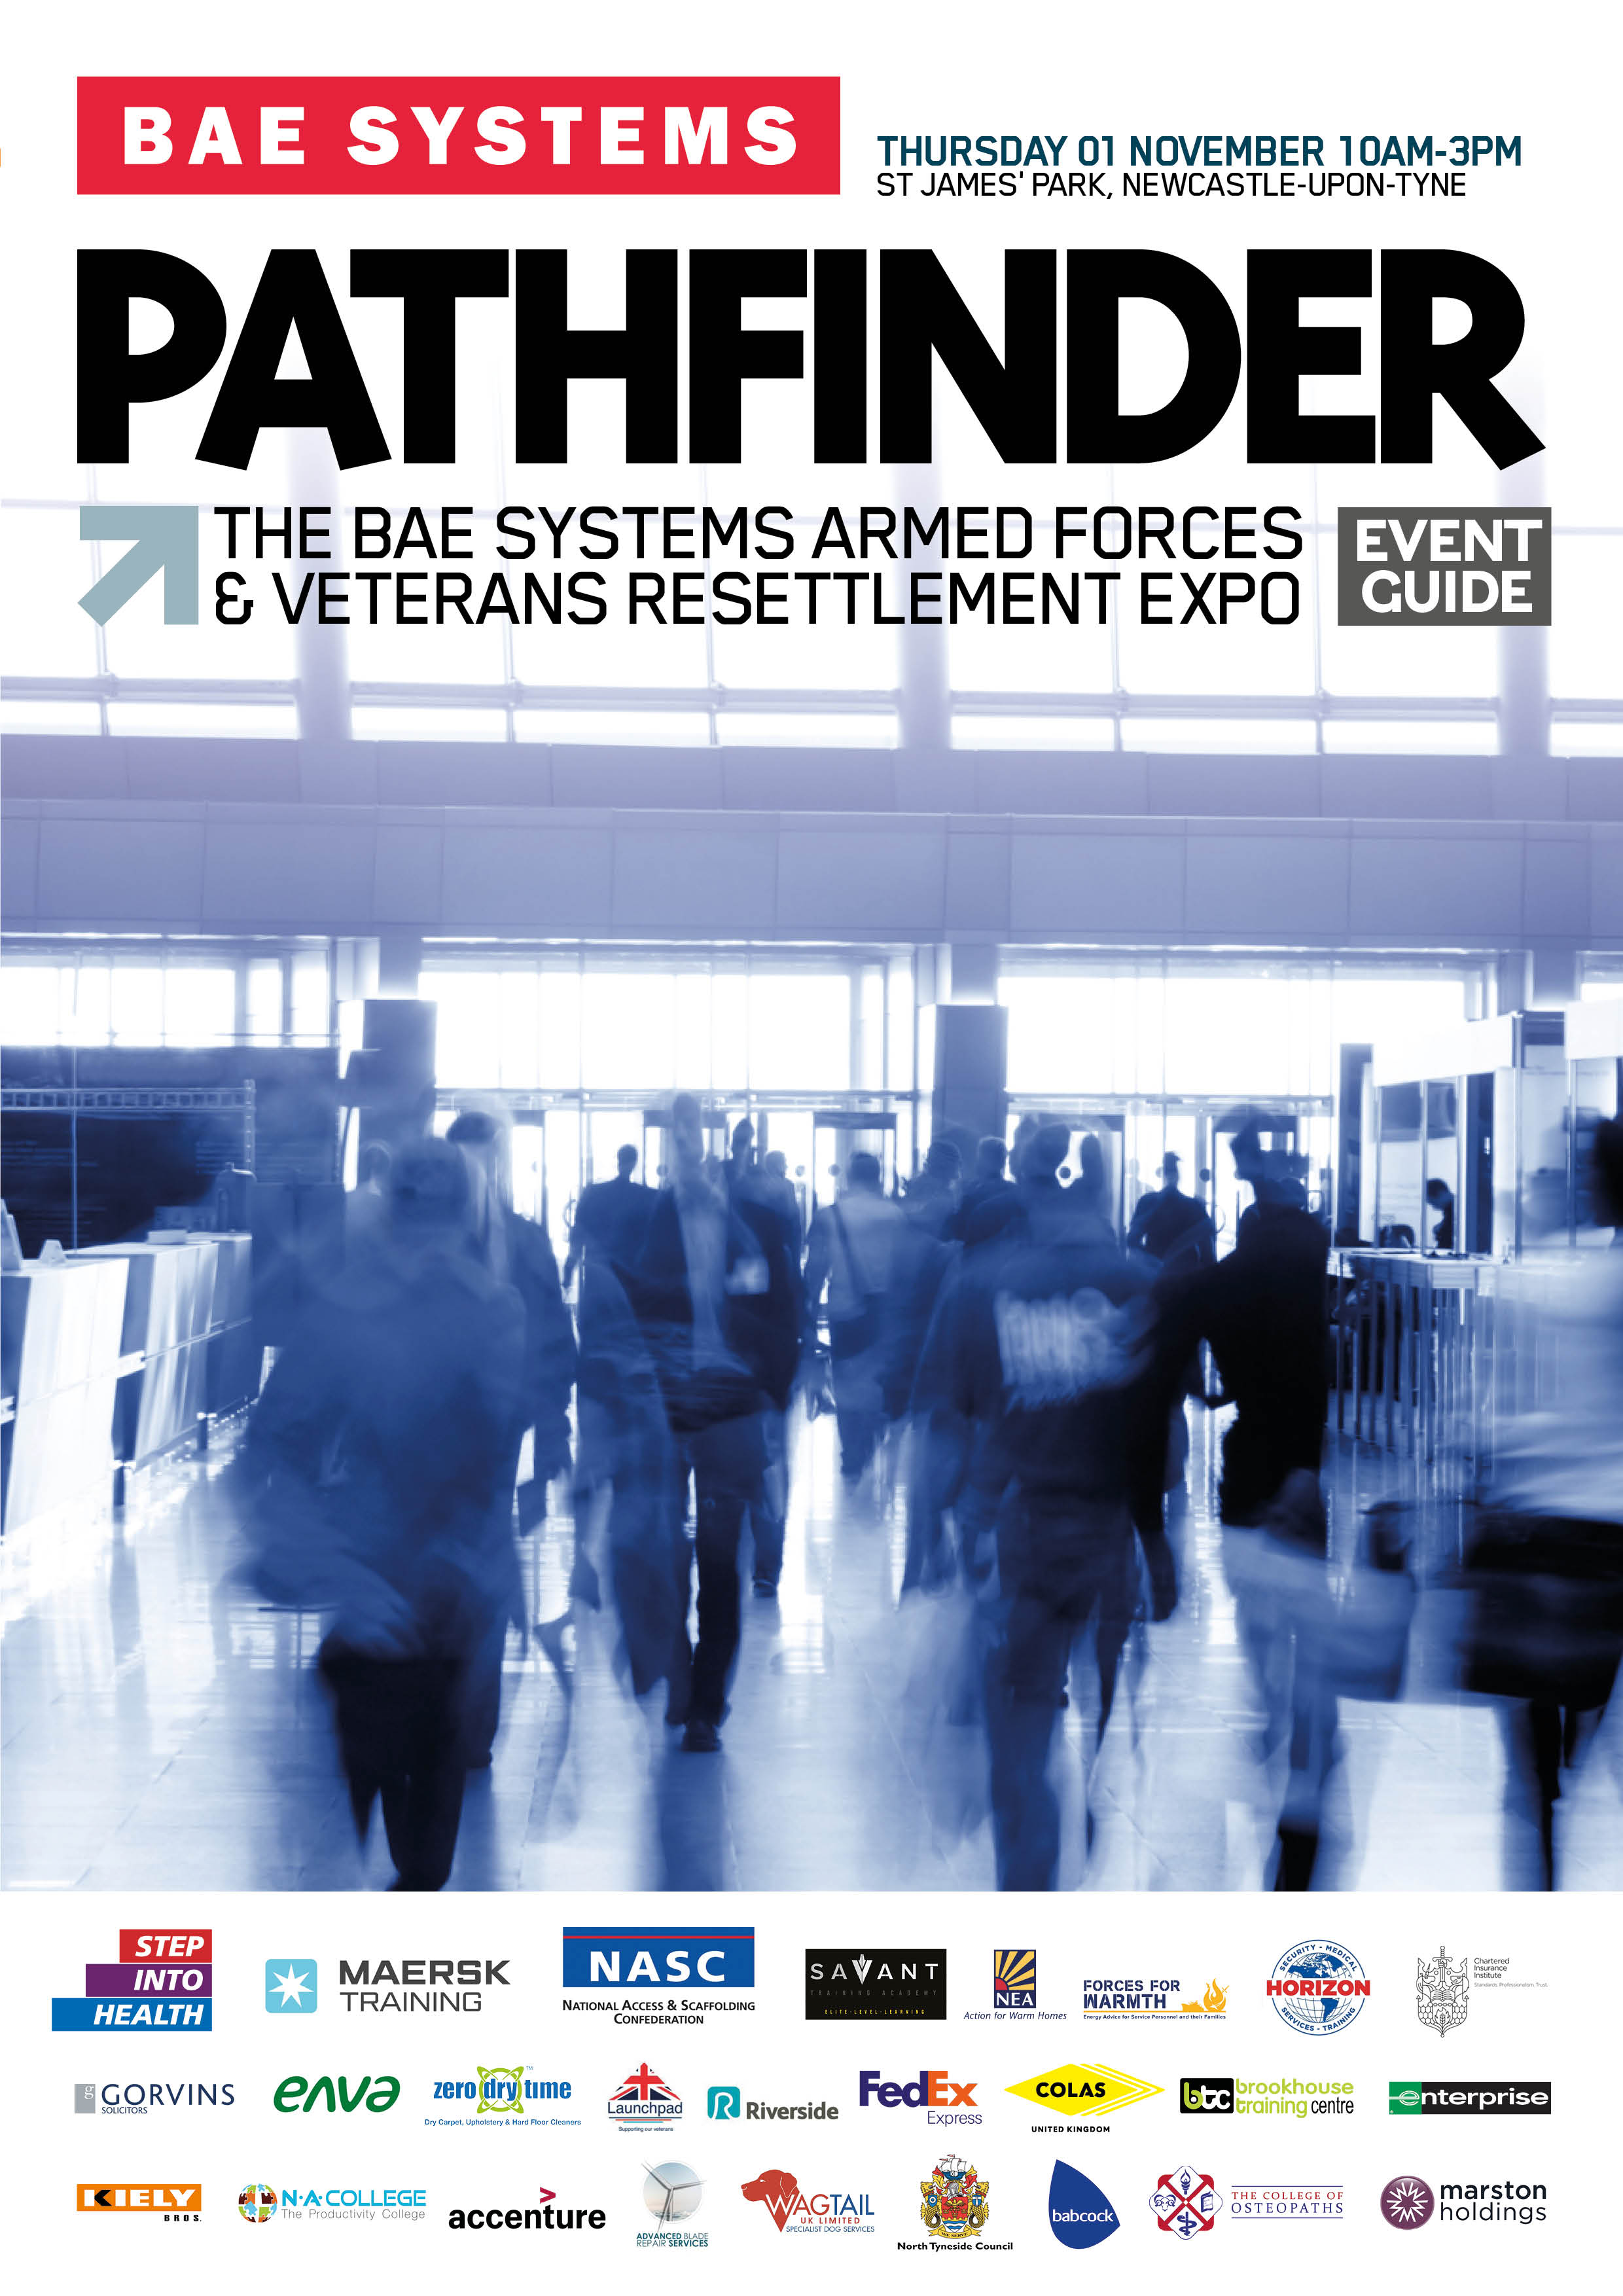 The BAE Systems Armed Forces & Veterans Resettlement Expo – A Word From The Editor